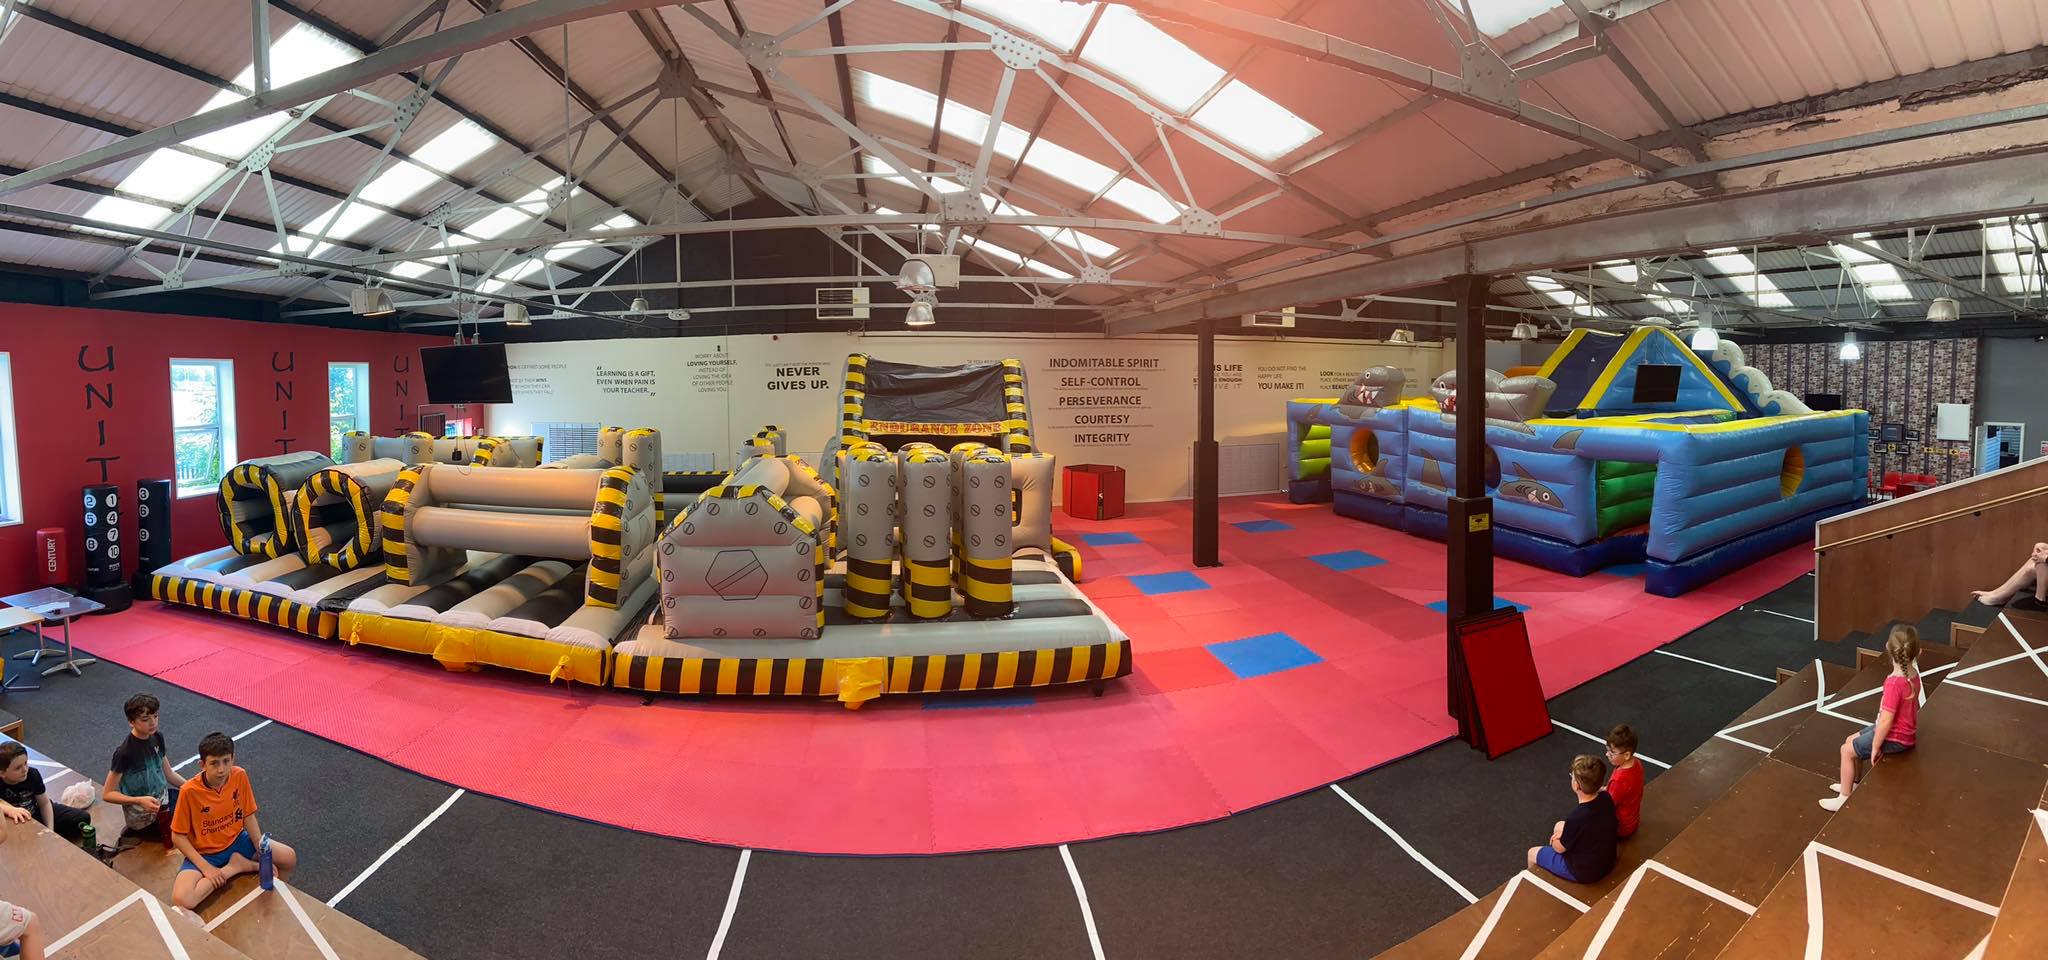 The brand new New Inflatable Zone at Unite Martial Arts on Tulketh Street in Southport. Photo by Dan Thomas